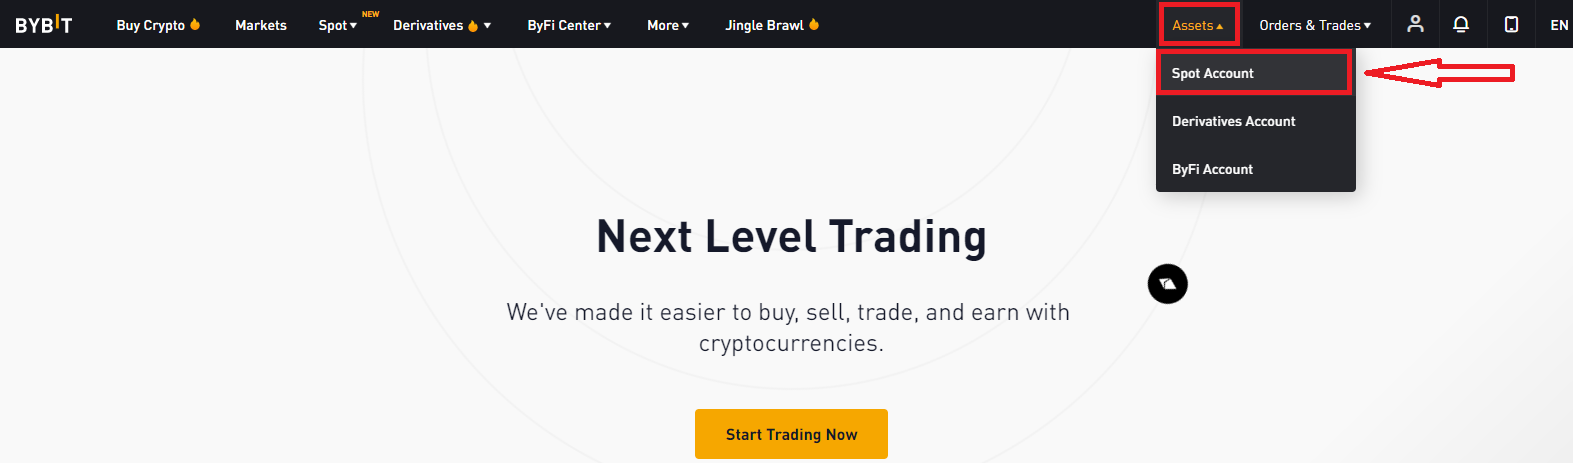 How to Start Bybit Trading in 2021: A Step-By-Step Guide for Beginners